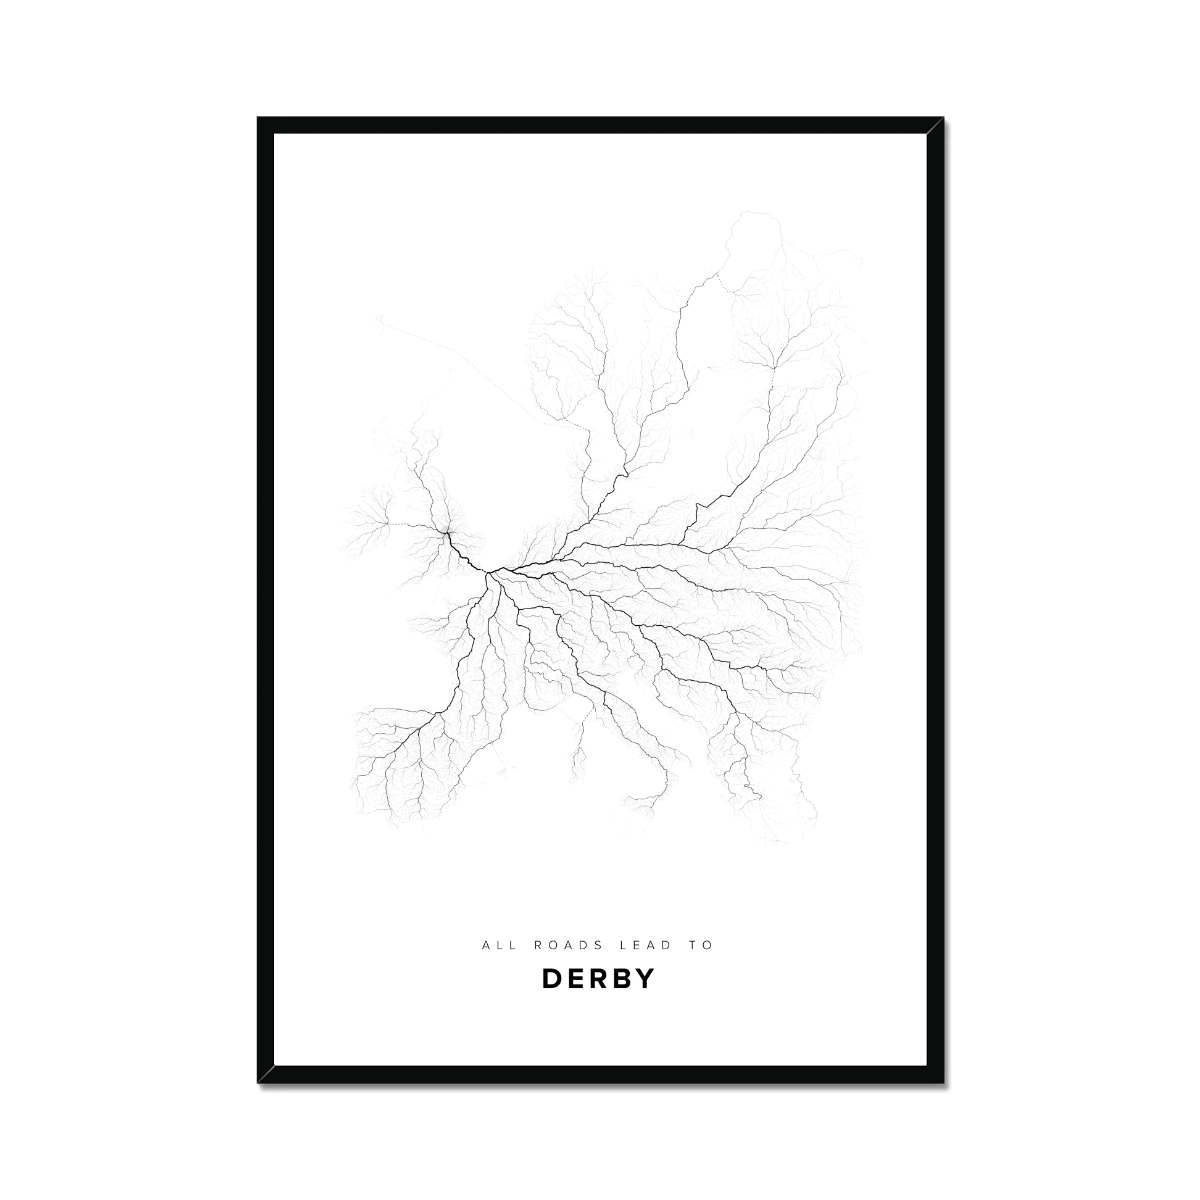 All roads lead to Derby (United Kingdom of Great Britain and Northern Ireland) Fine Art Map Print